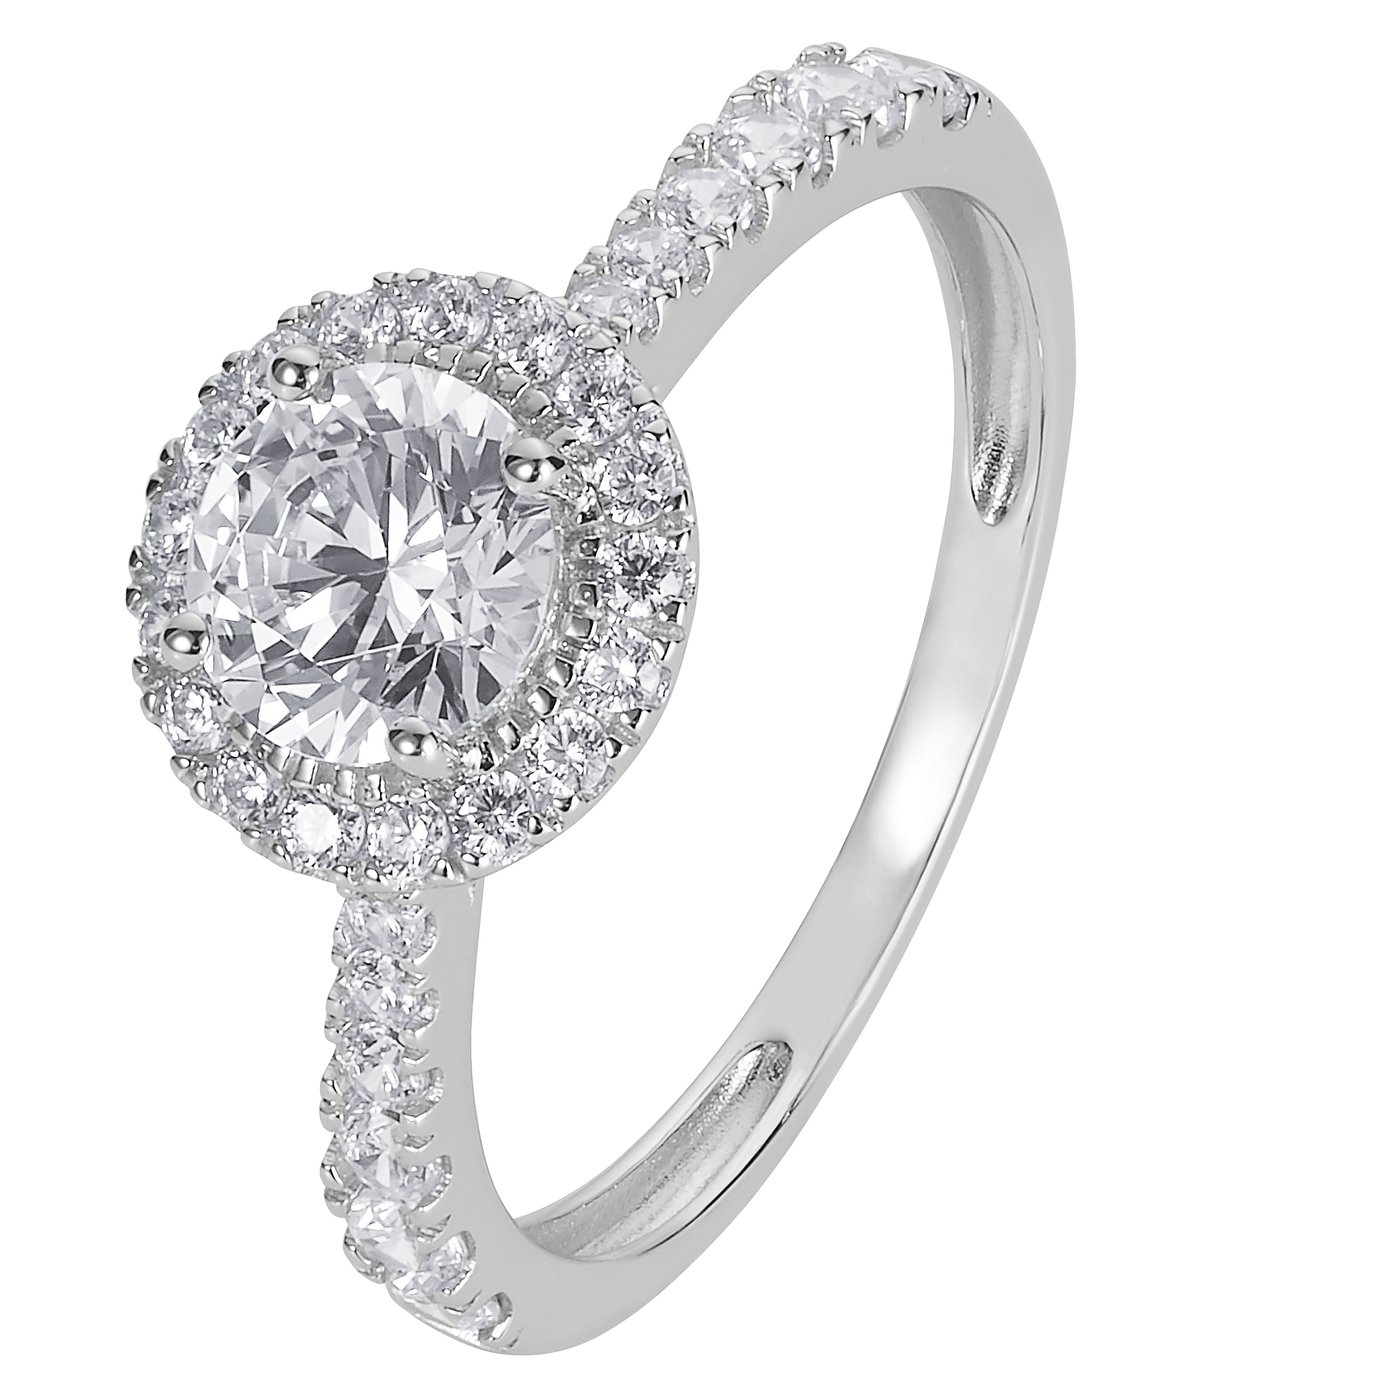 Revere 9ct White Gold Cubic Zirconia Halo Engagement Ring V